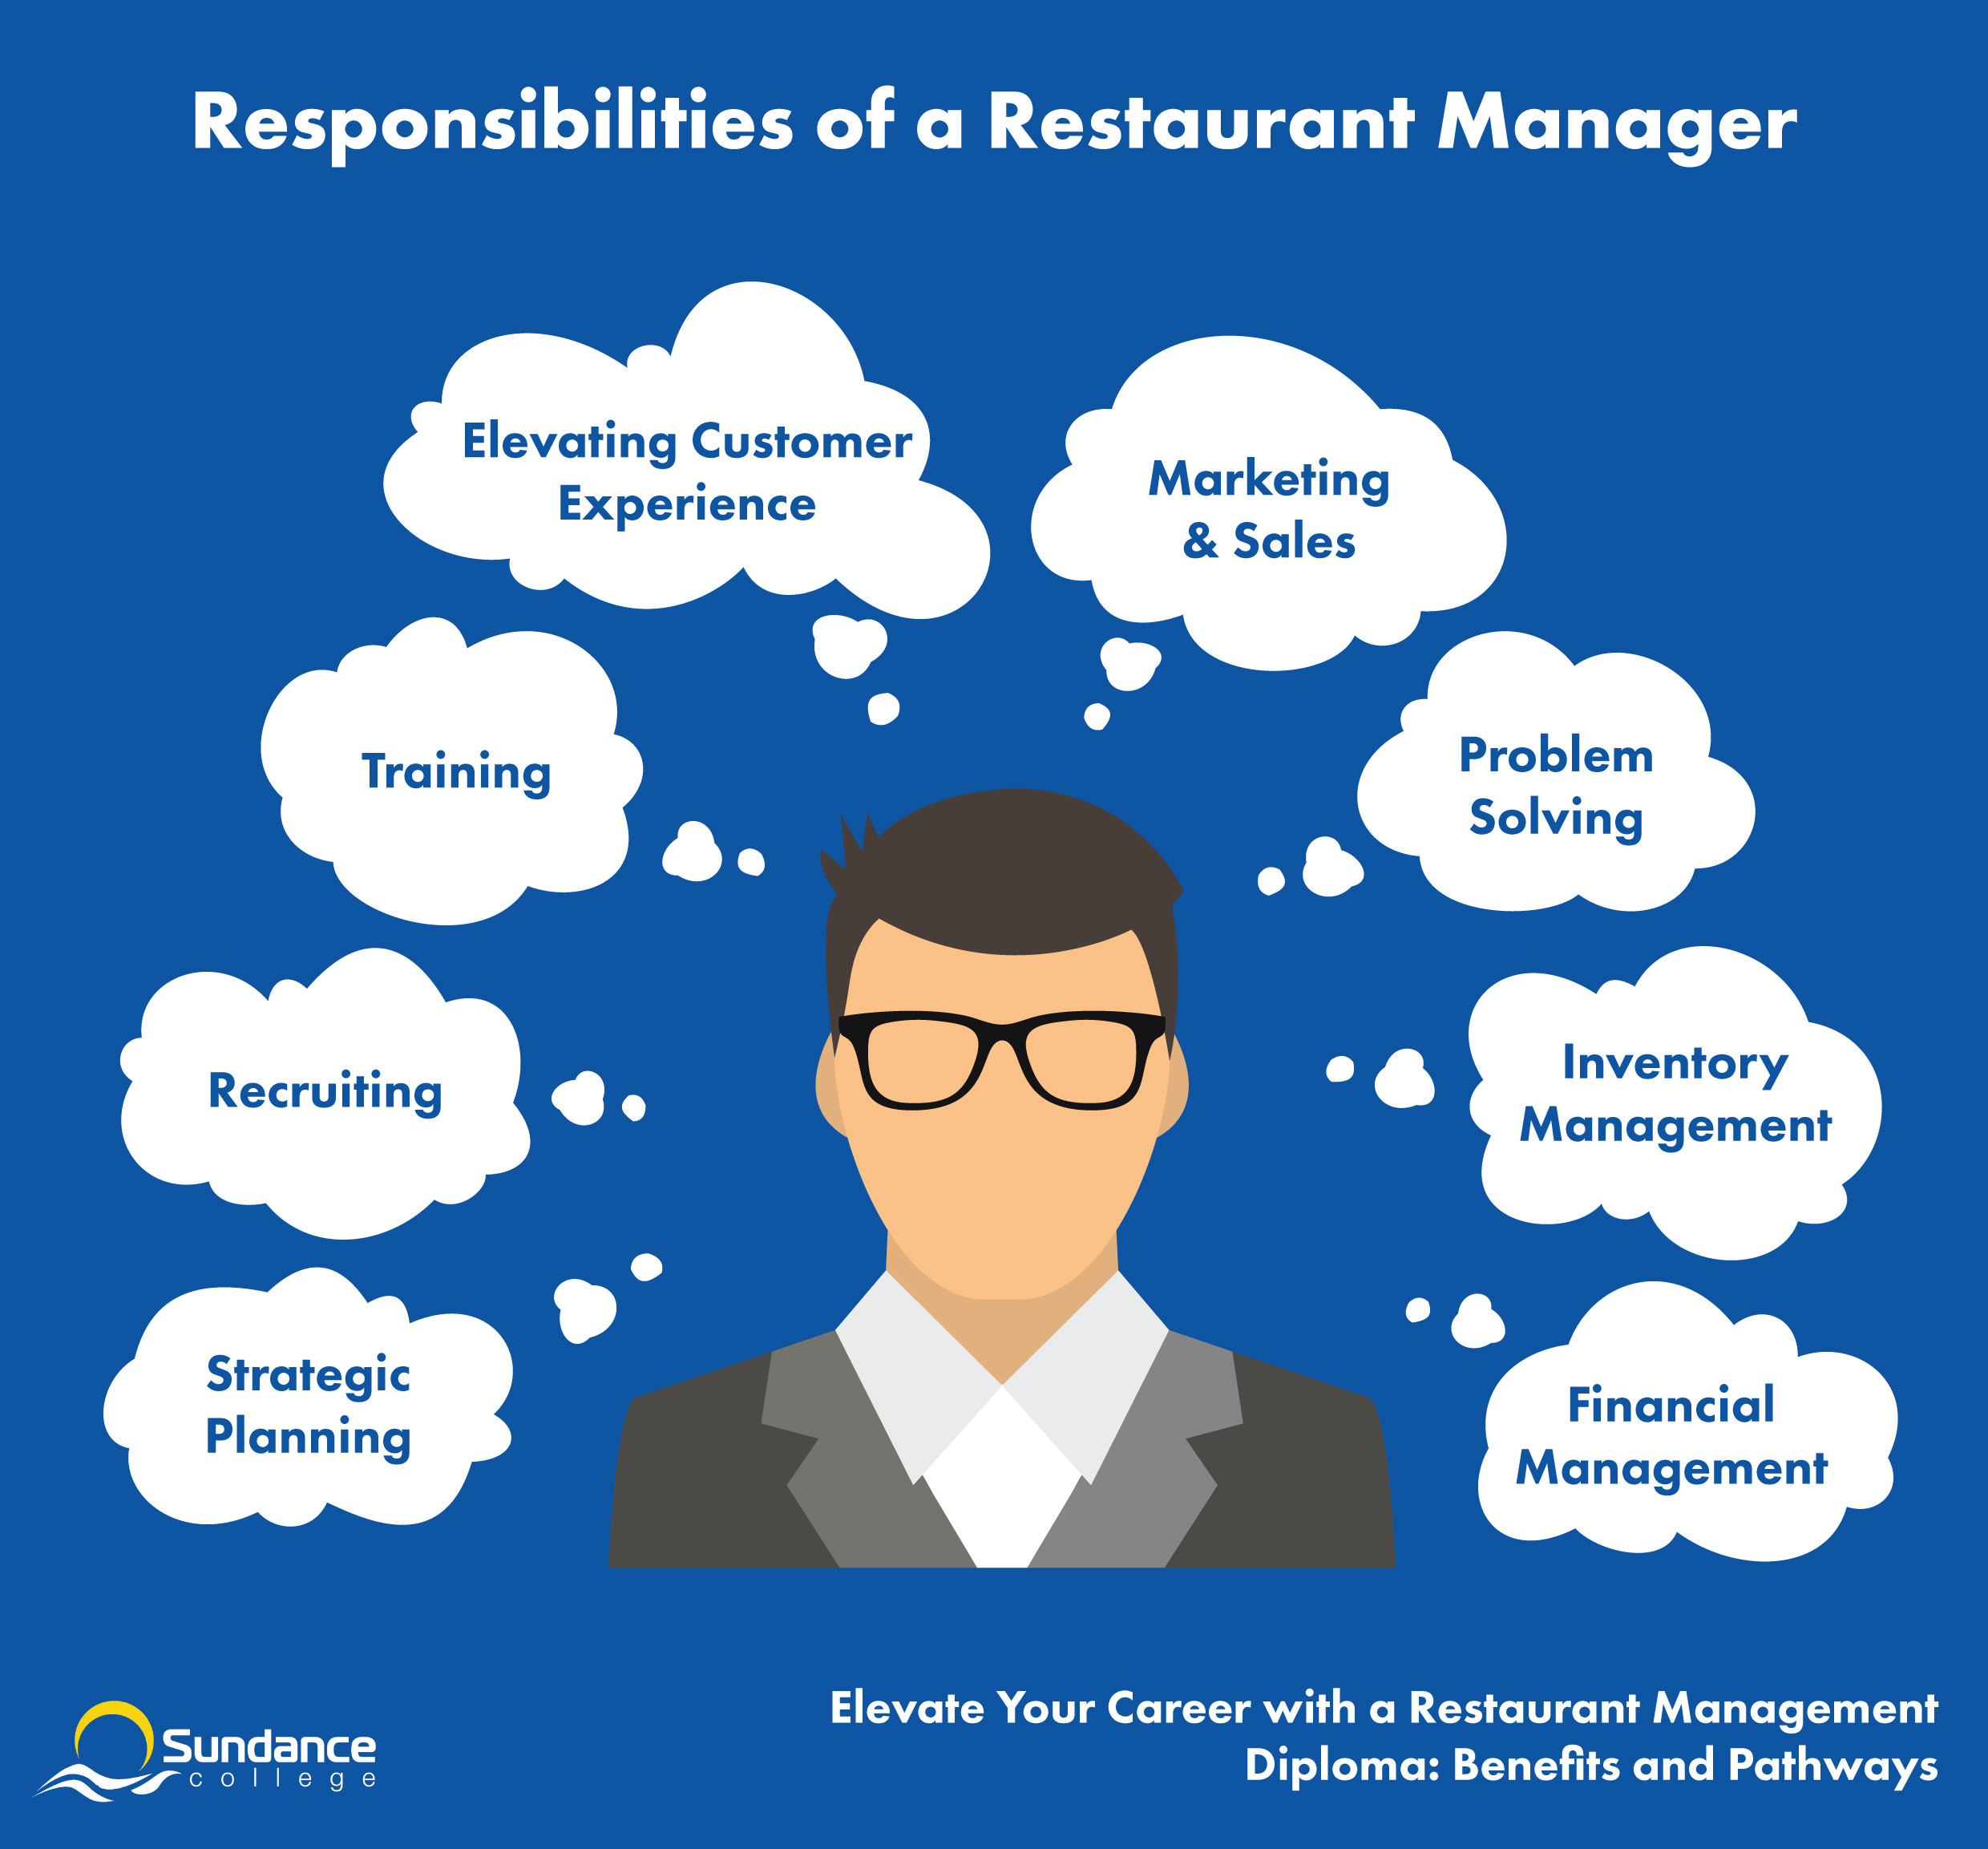 Restaurant Manager Responsibilities Infographic made by Sundance College.